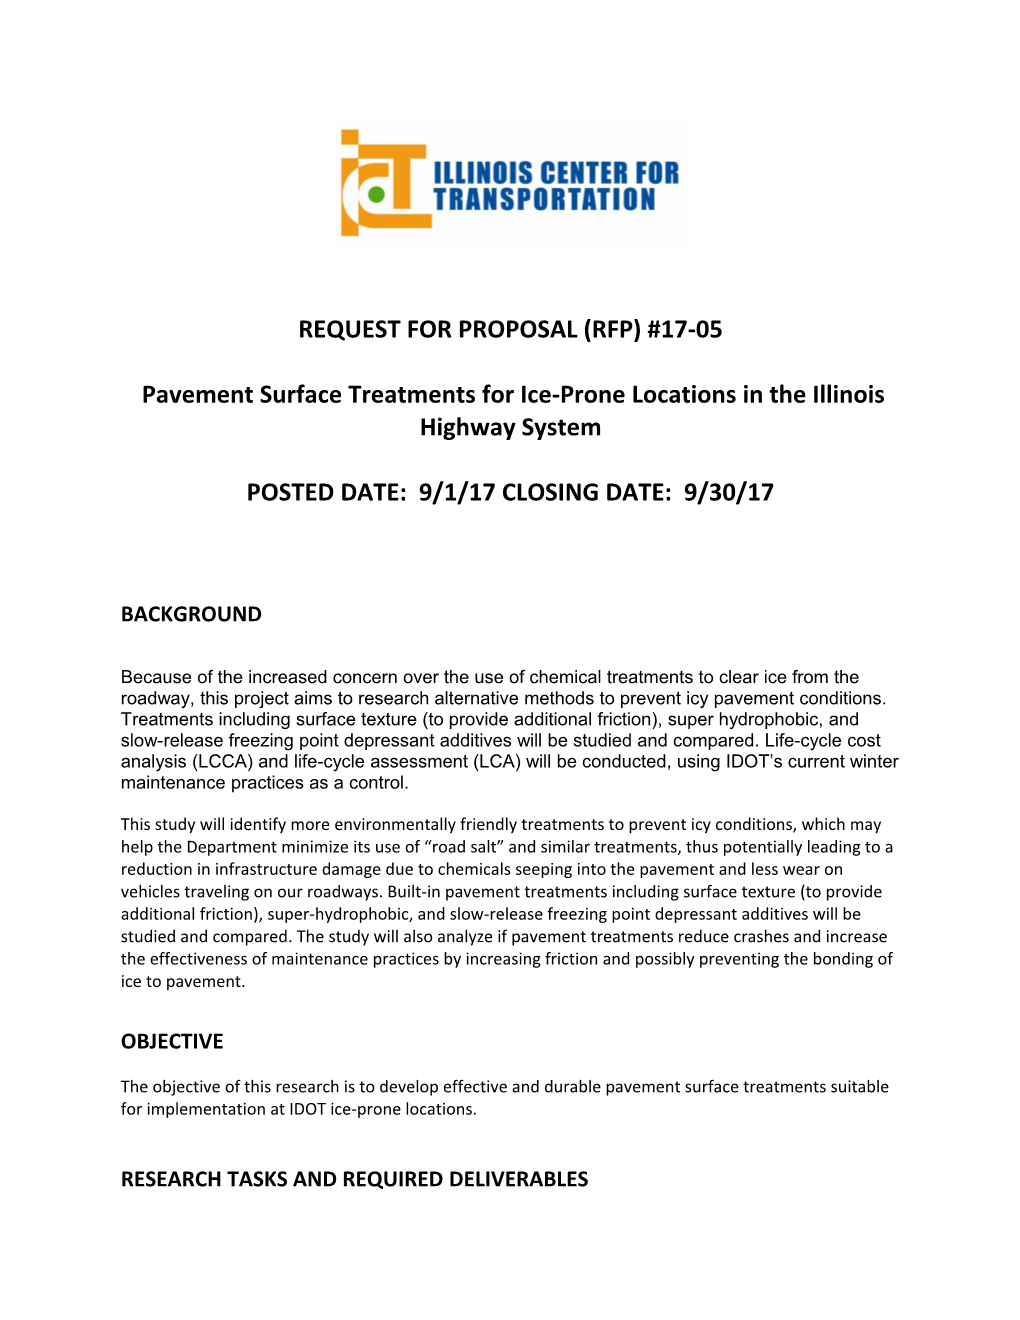 Request for Proposal (Rfp) #17-05